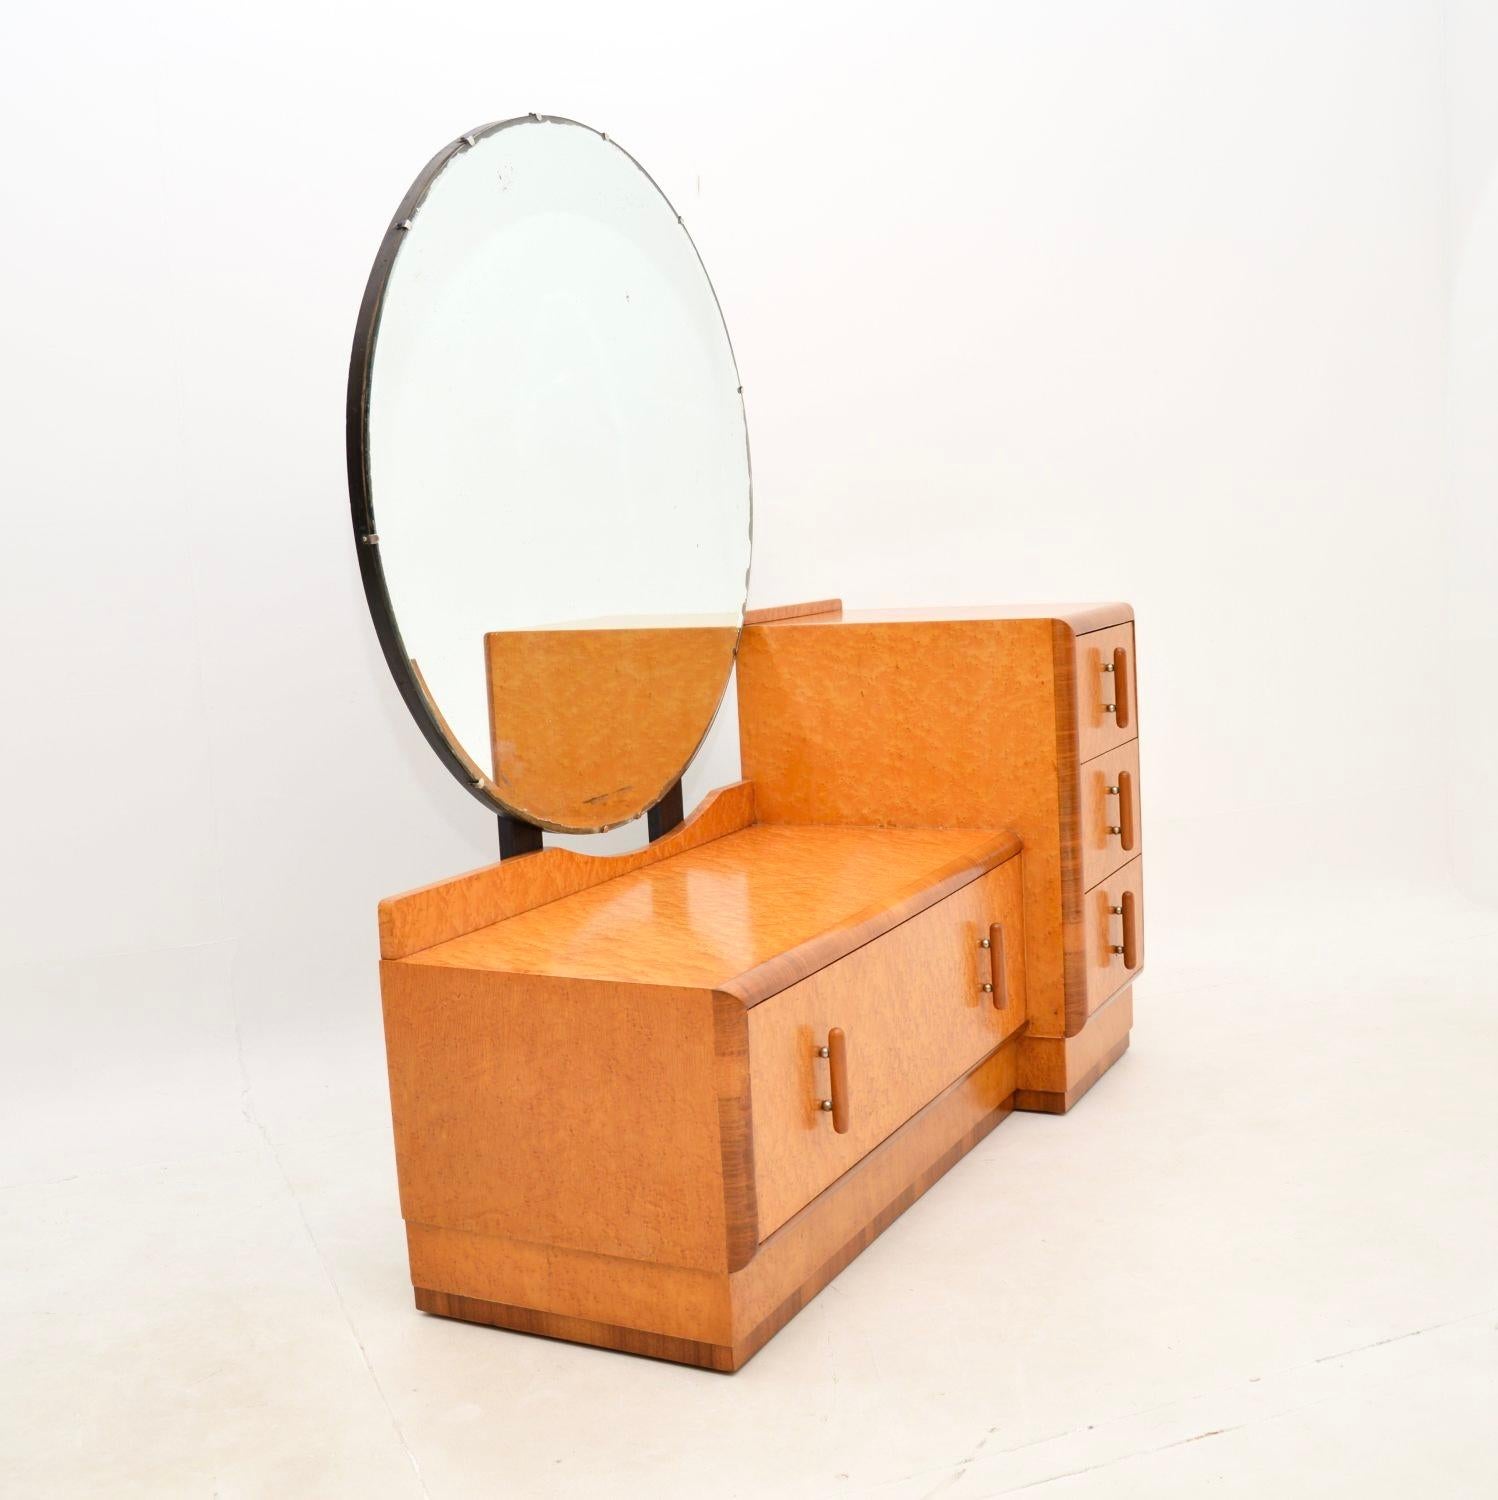 A stunning Art Deco birds eye maple and walnut dressing table, made in England and dating from the 1920-30’s.

It is of superb quality with a very stylish and practical design. The birds eye maple has a gorgeous colour tone and beautiful grain